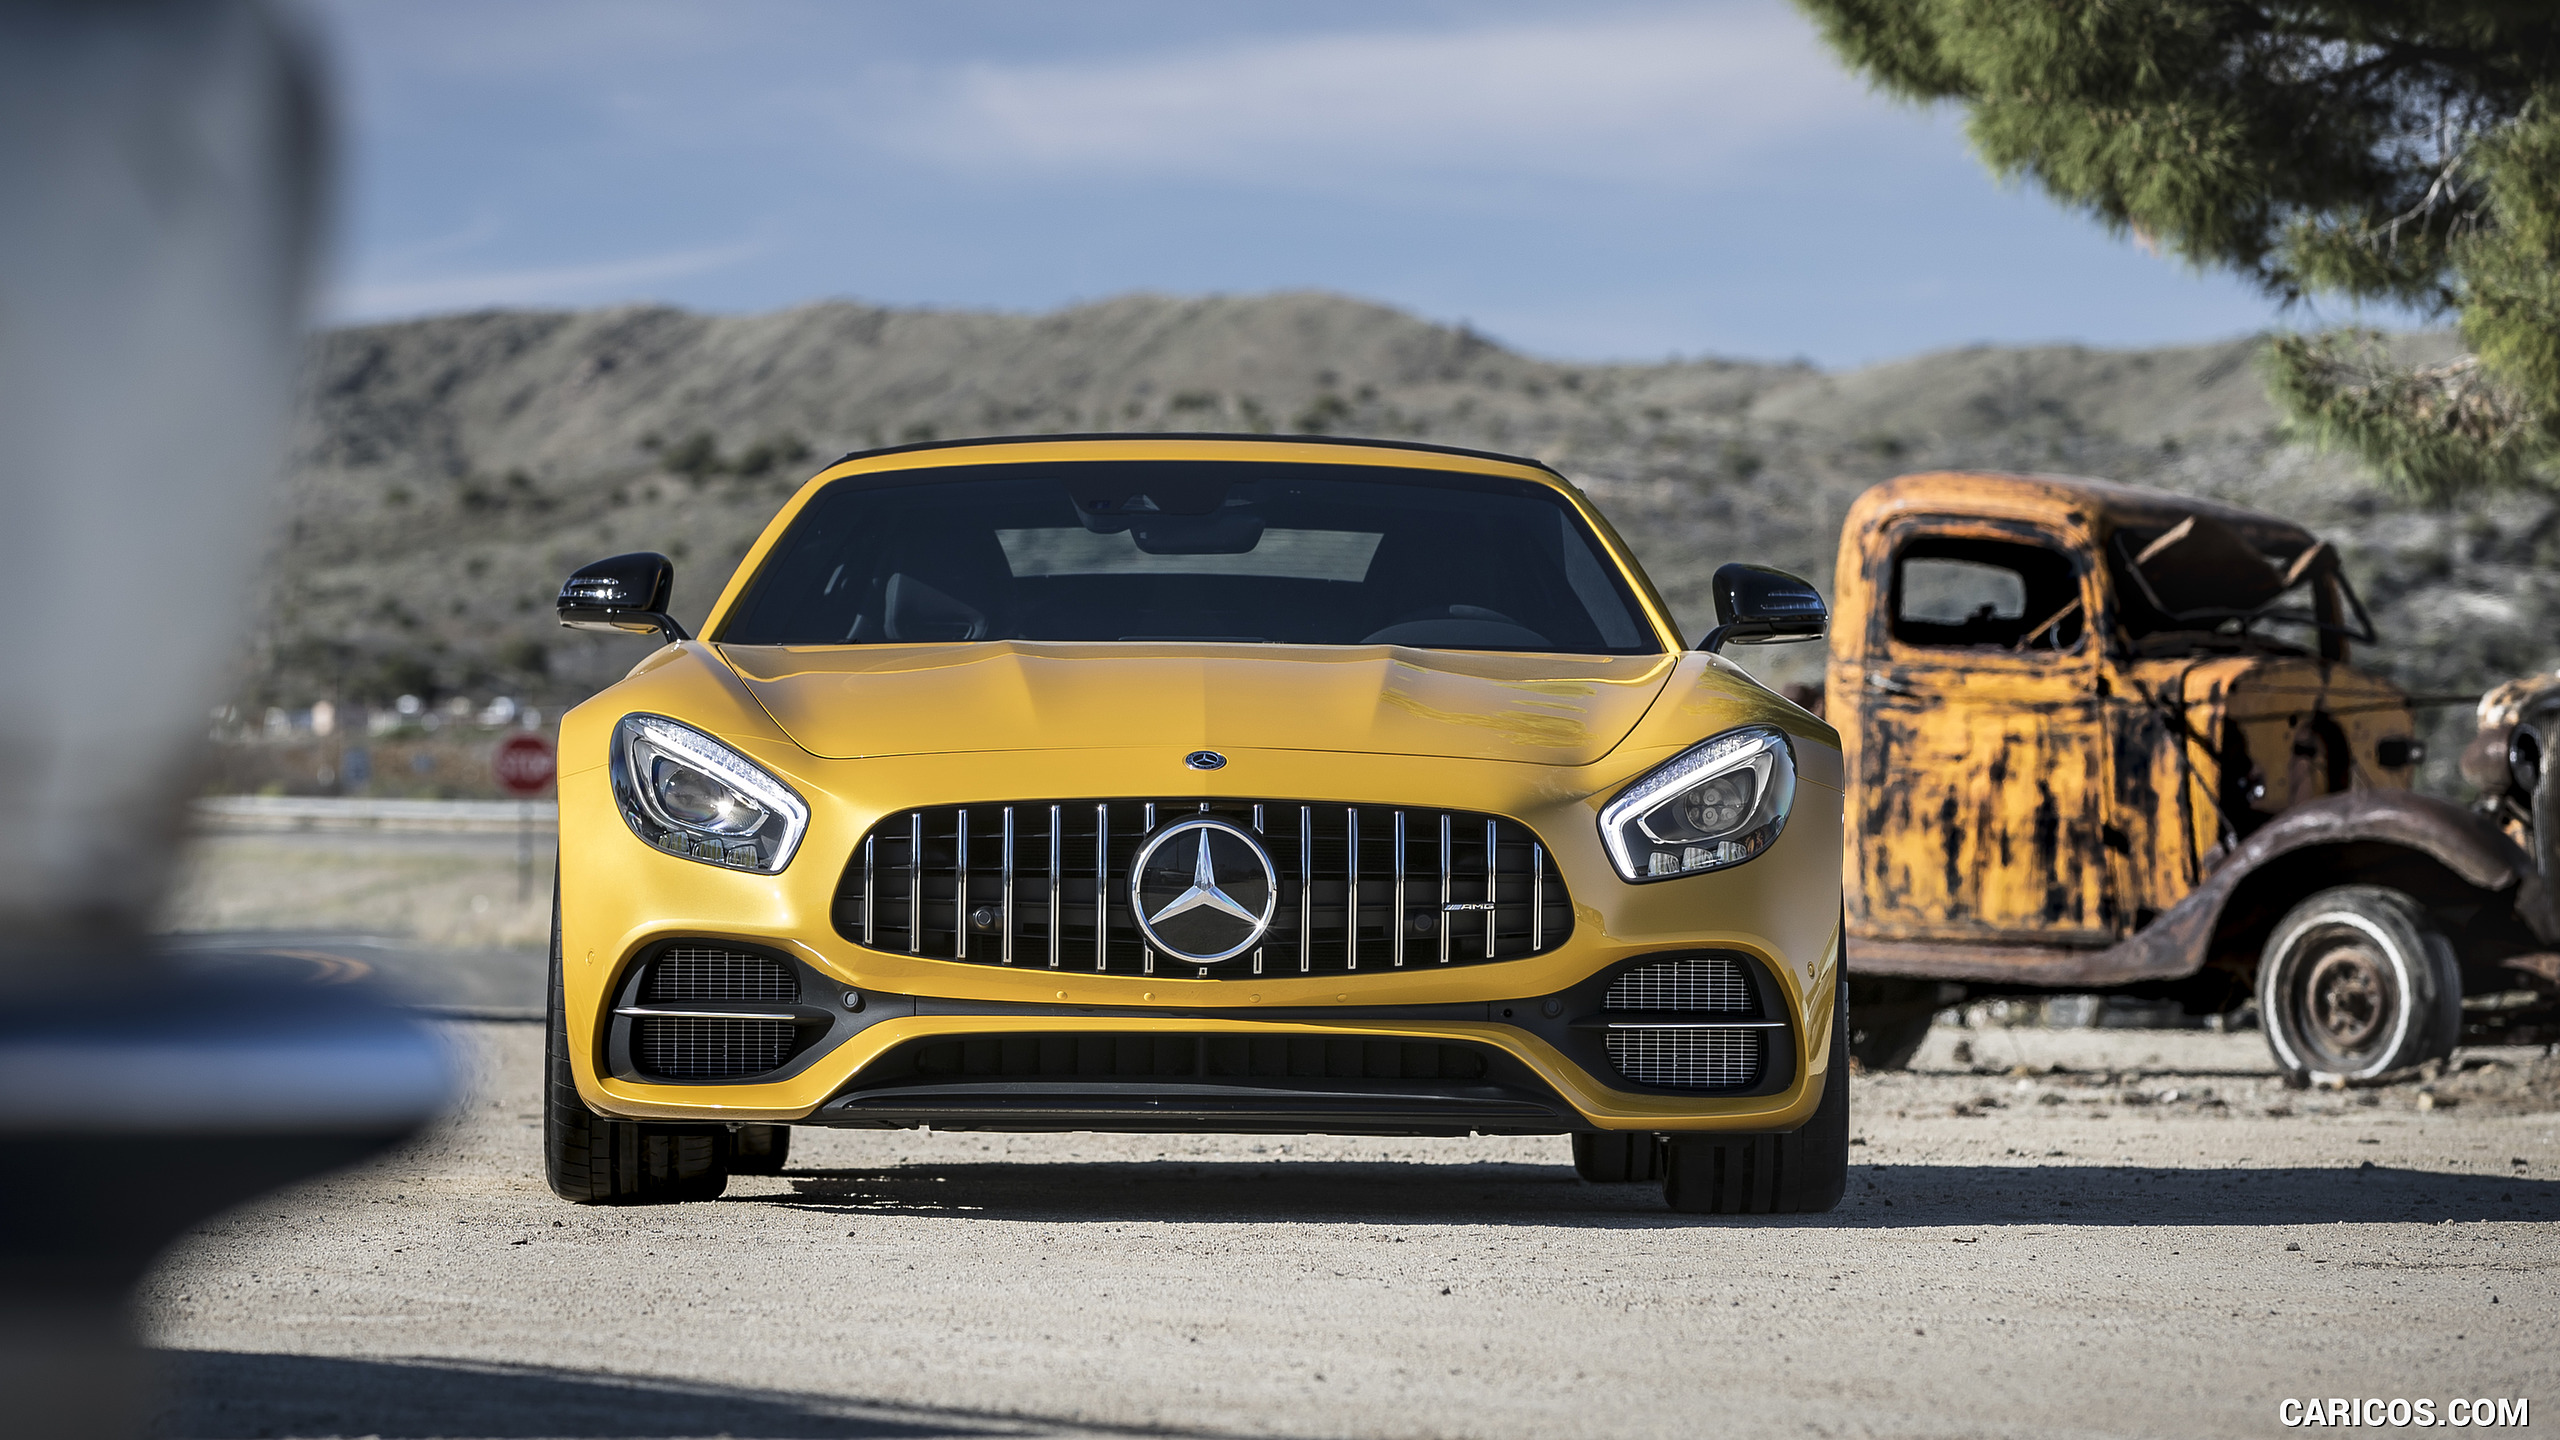 2018 Mercedes-AMG GT C Roadster - Front, #211 of 350